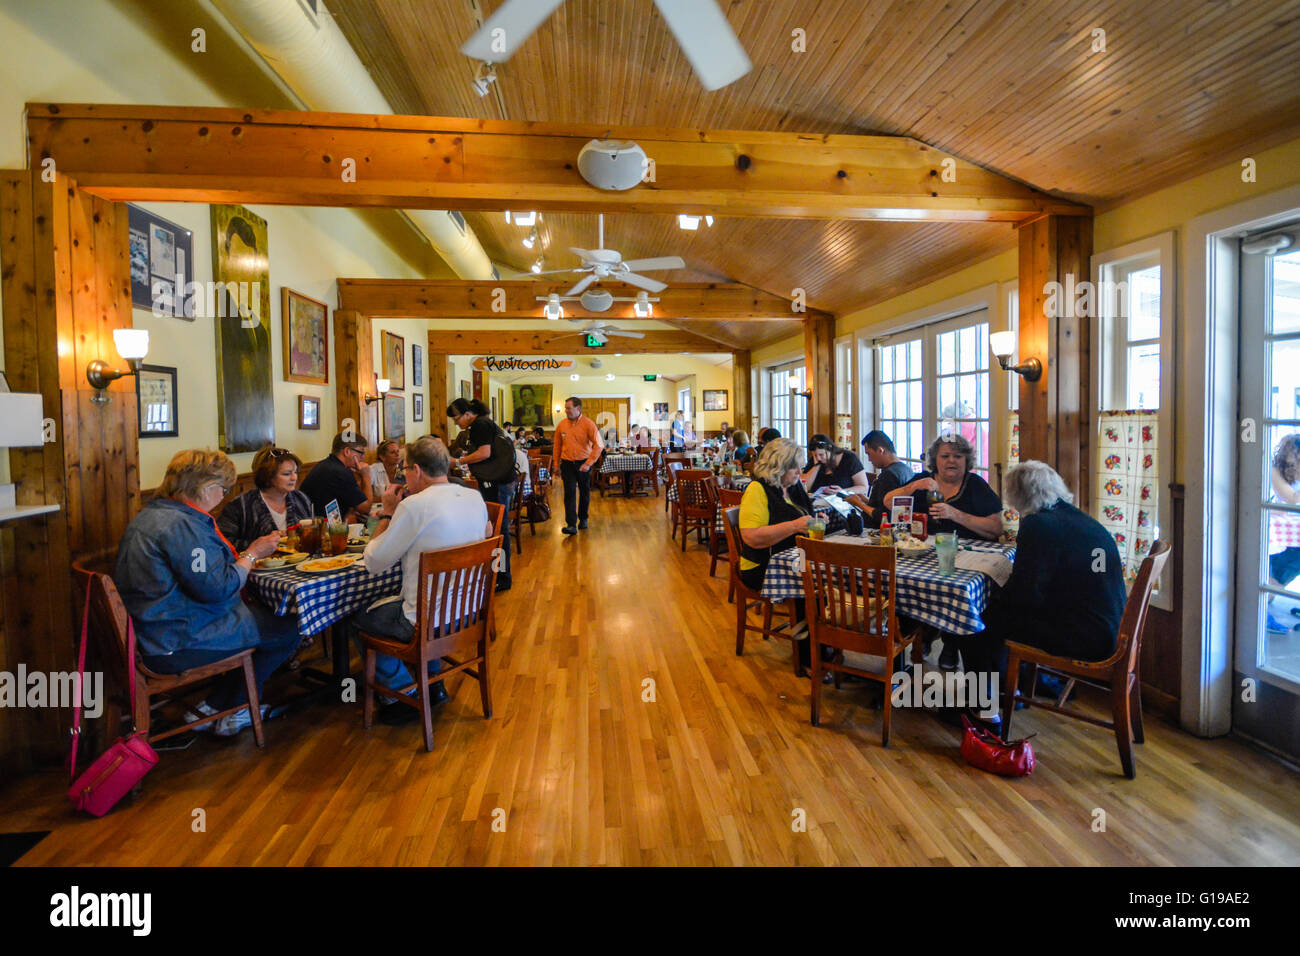 A satisfied crowd of people in wood designed dining room, famous for Country Cooking, at the Loveless Cafe & Motel, Nashville TN, USA Stock Photo